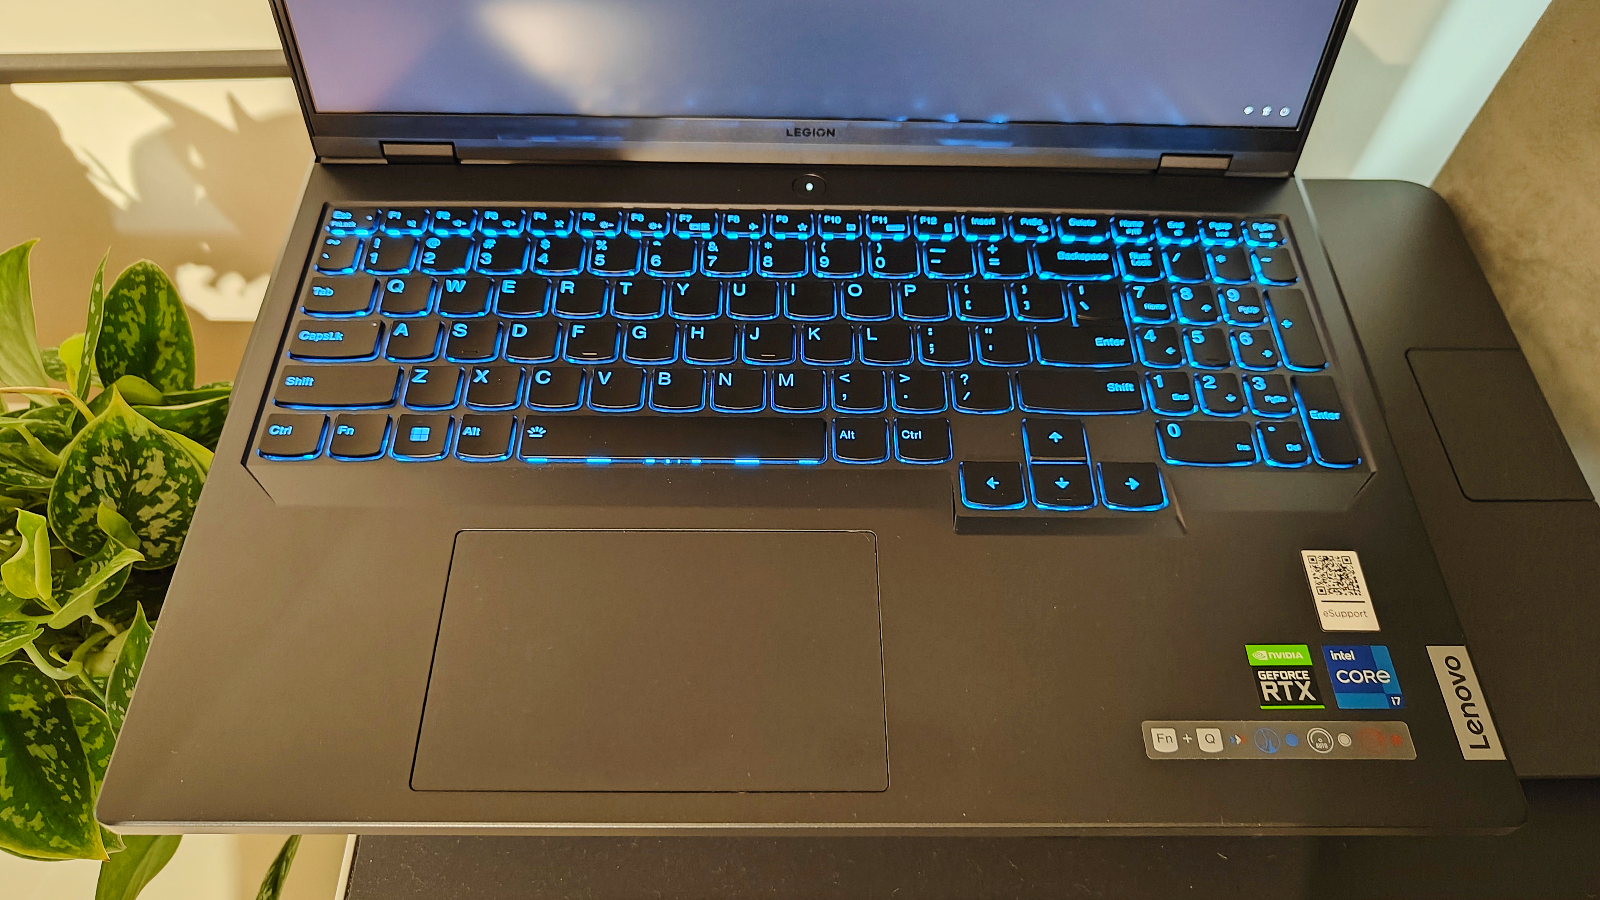 Lenovo Legion Pro 5i review: Subtle styling, performance, and price tag make this a win.